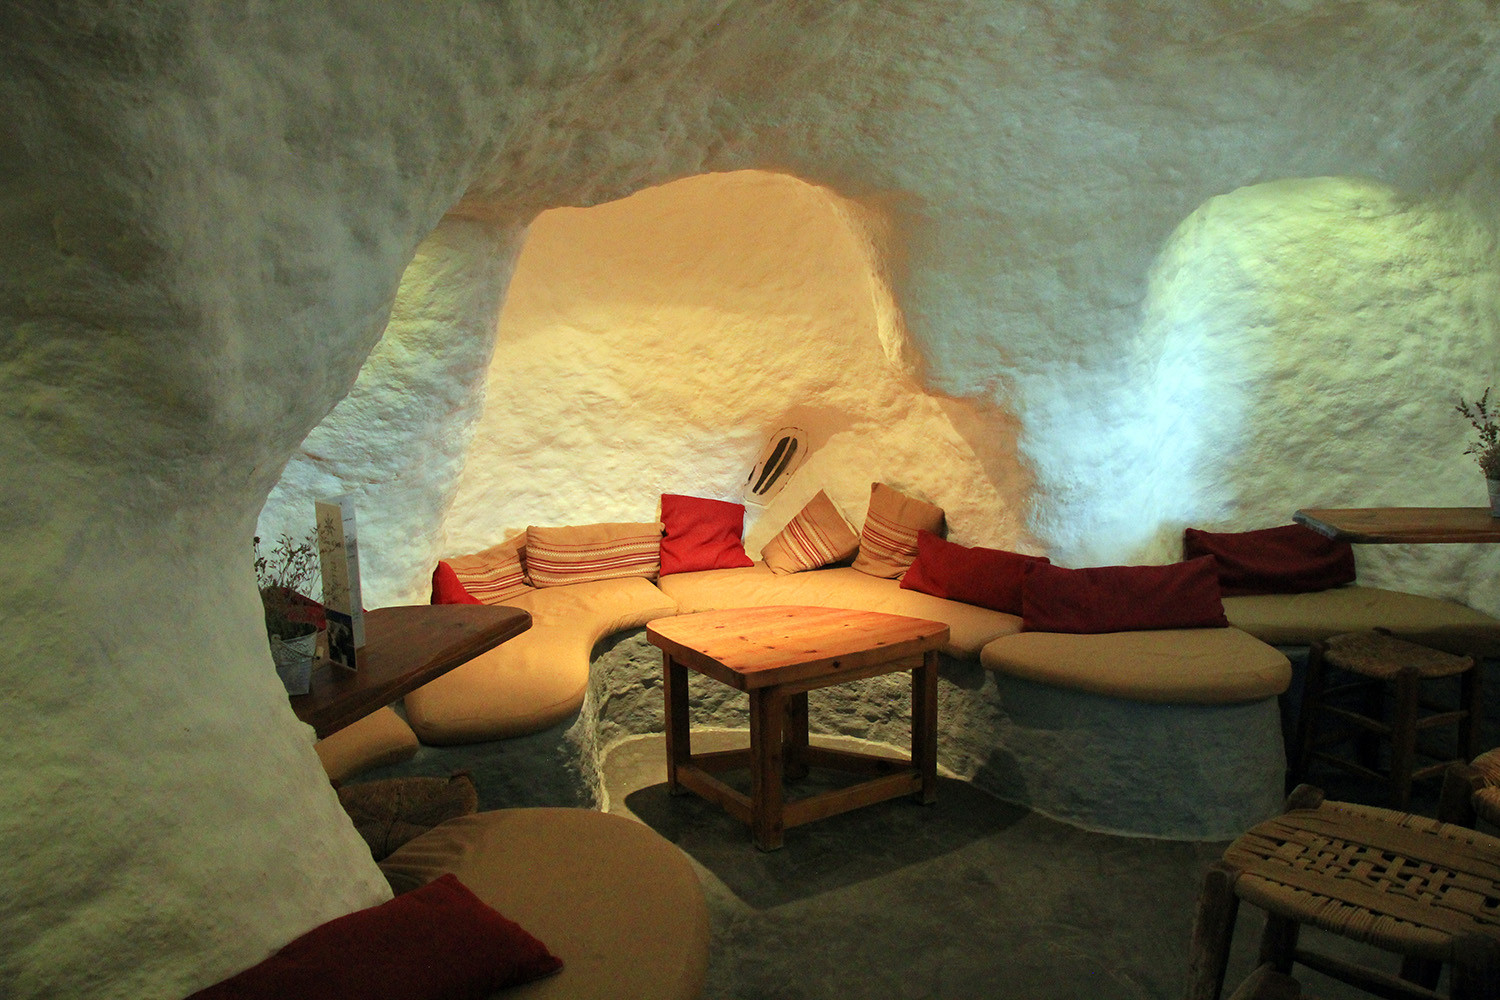 The cave restaurant